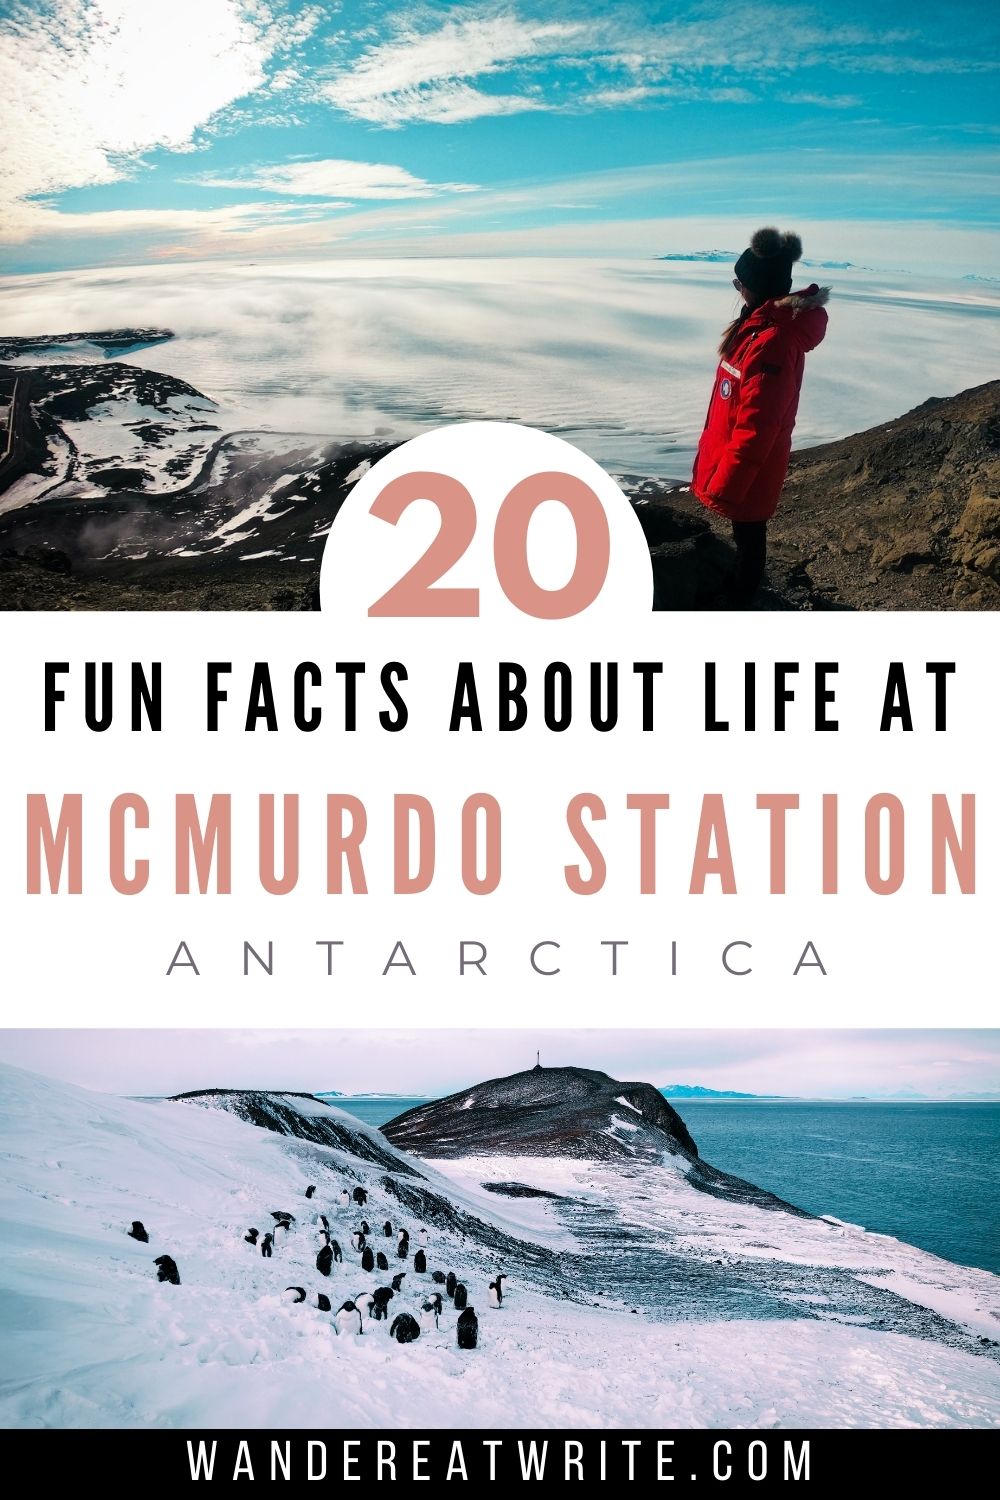 Pin image; text reads: 20 fun facts about life at McMurdo Station Antarctica. Top photo: girl in Big Red parka overlooking Scott Base from Ob Hill; Bottom photo: a group of penguins gathered on a snowy hill at Hut point